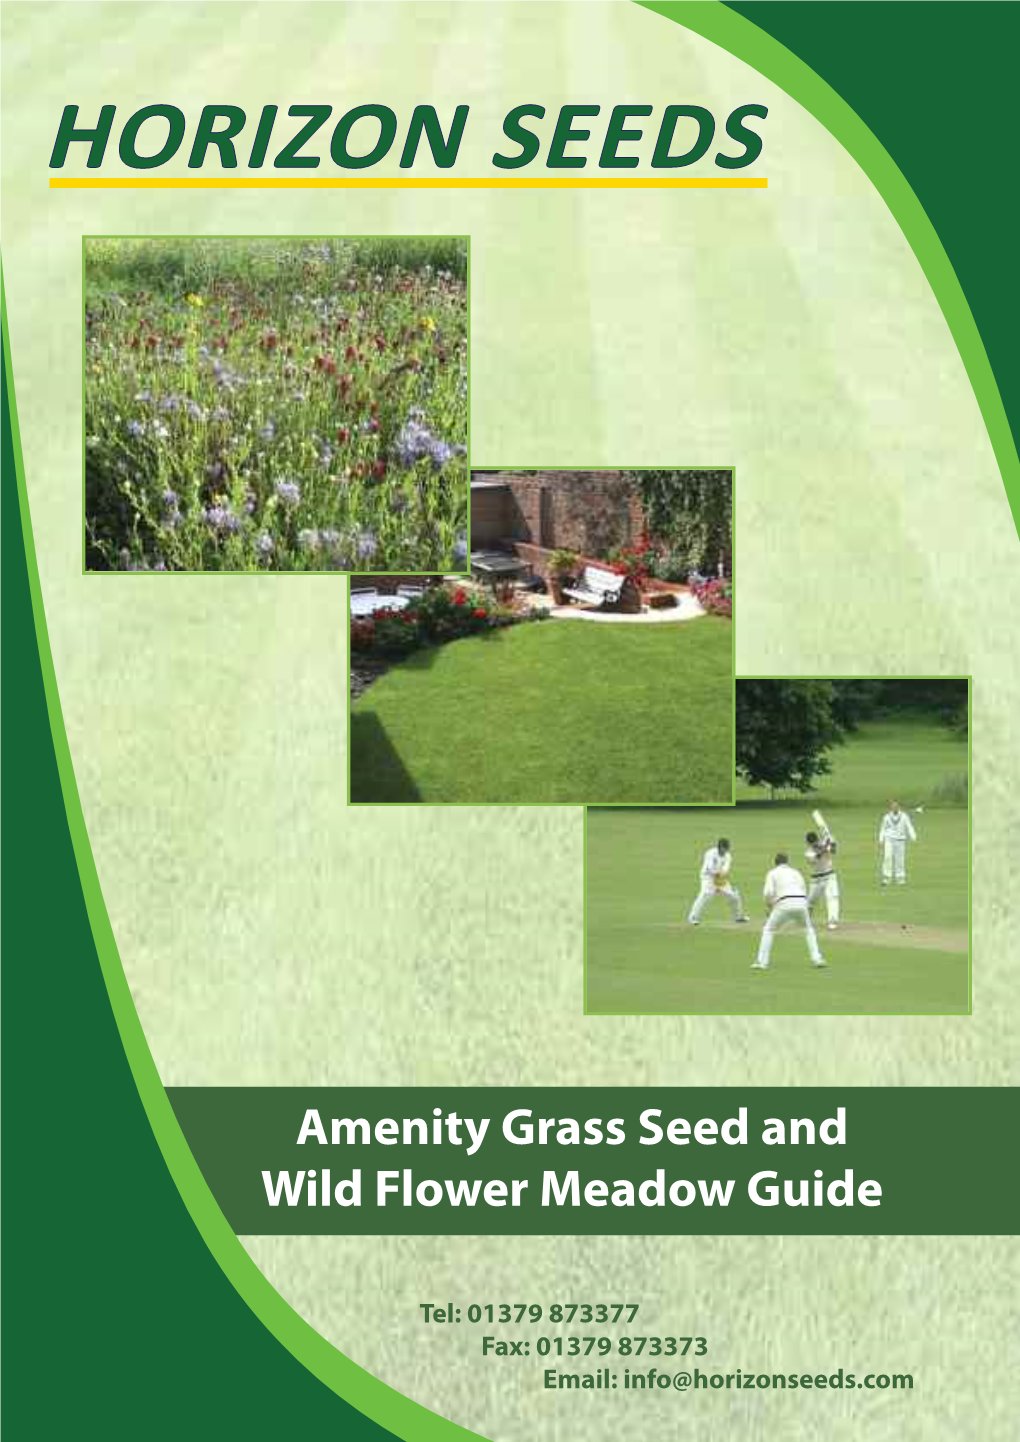 Amenity Grass Seed and Wild Flower Meadow Guide